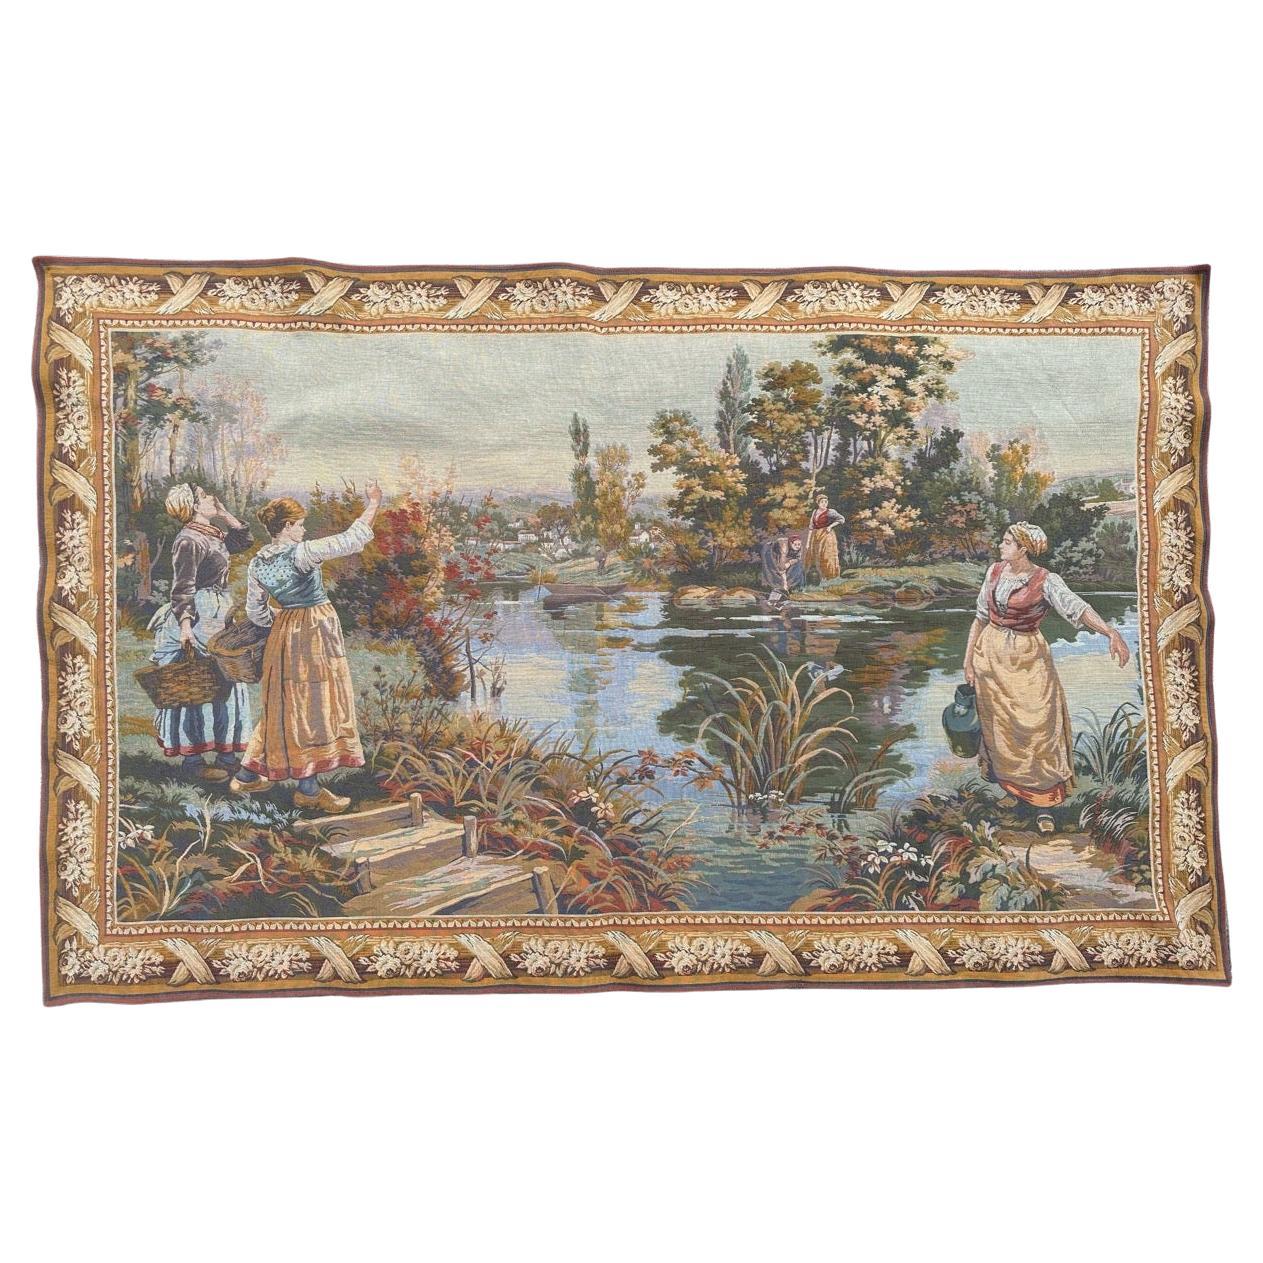 Bobyrug’s Very Pretty Vintage Aubusson Style French Halluin Jaquar Tapestry